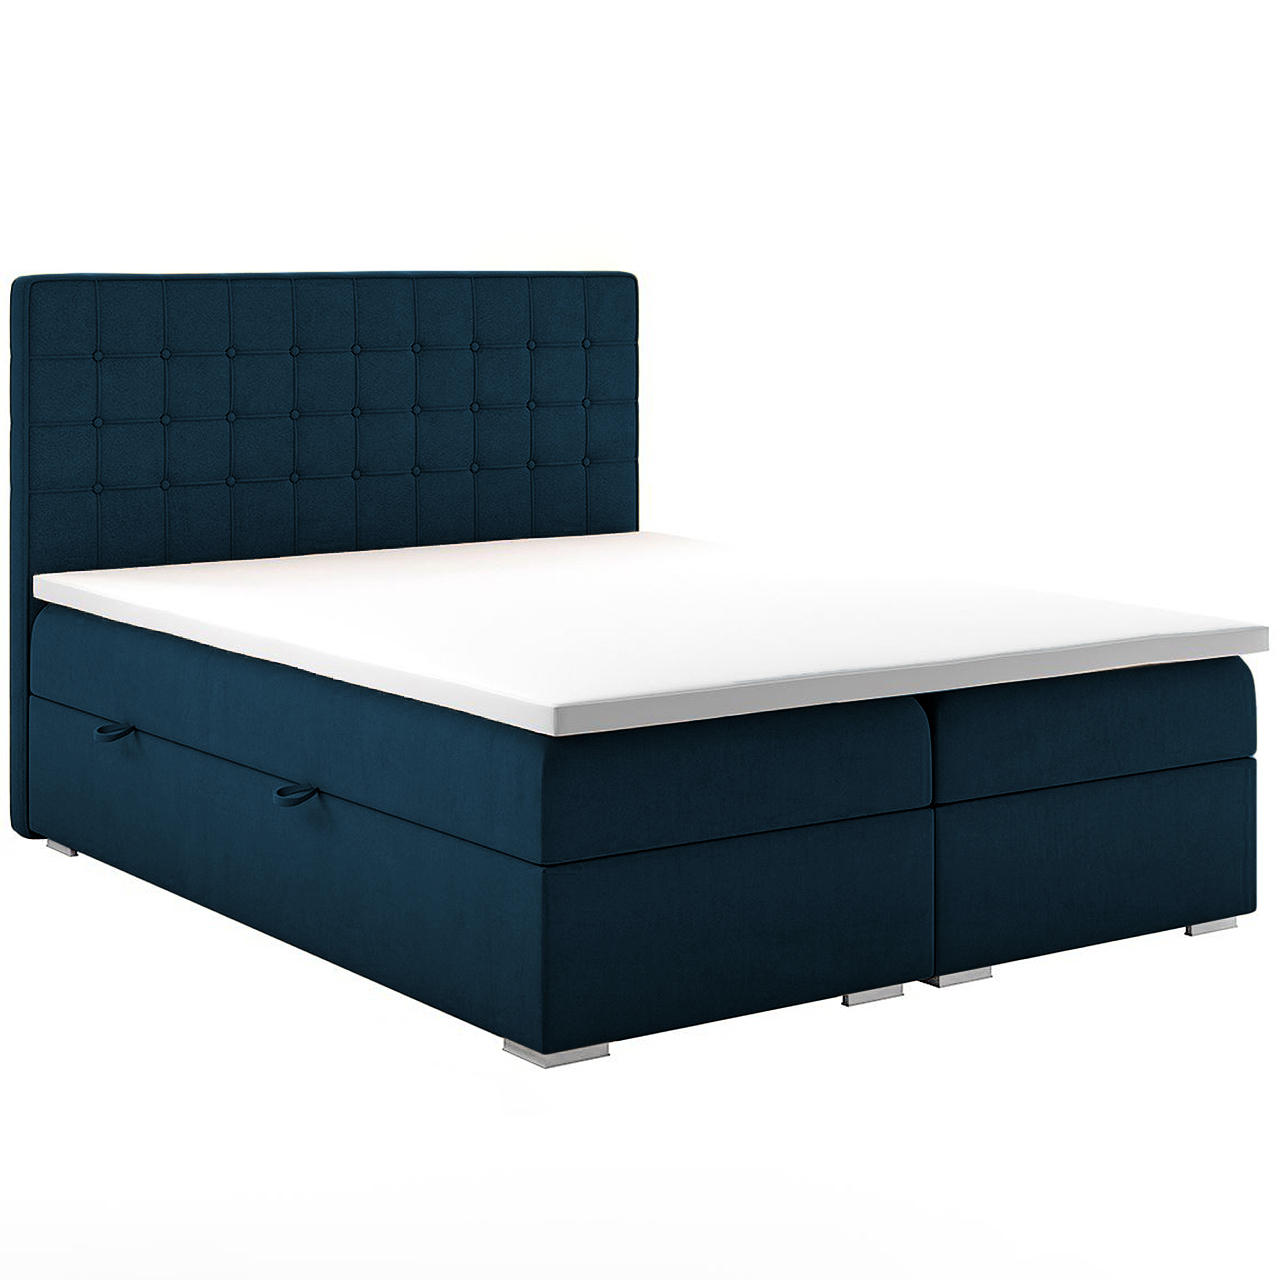 Upholstered bed CARLOS 160x200 monolith 76